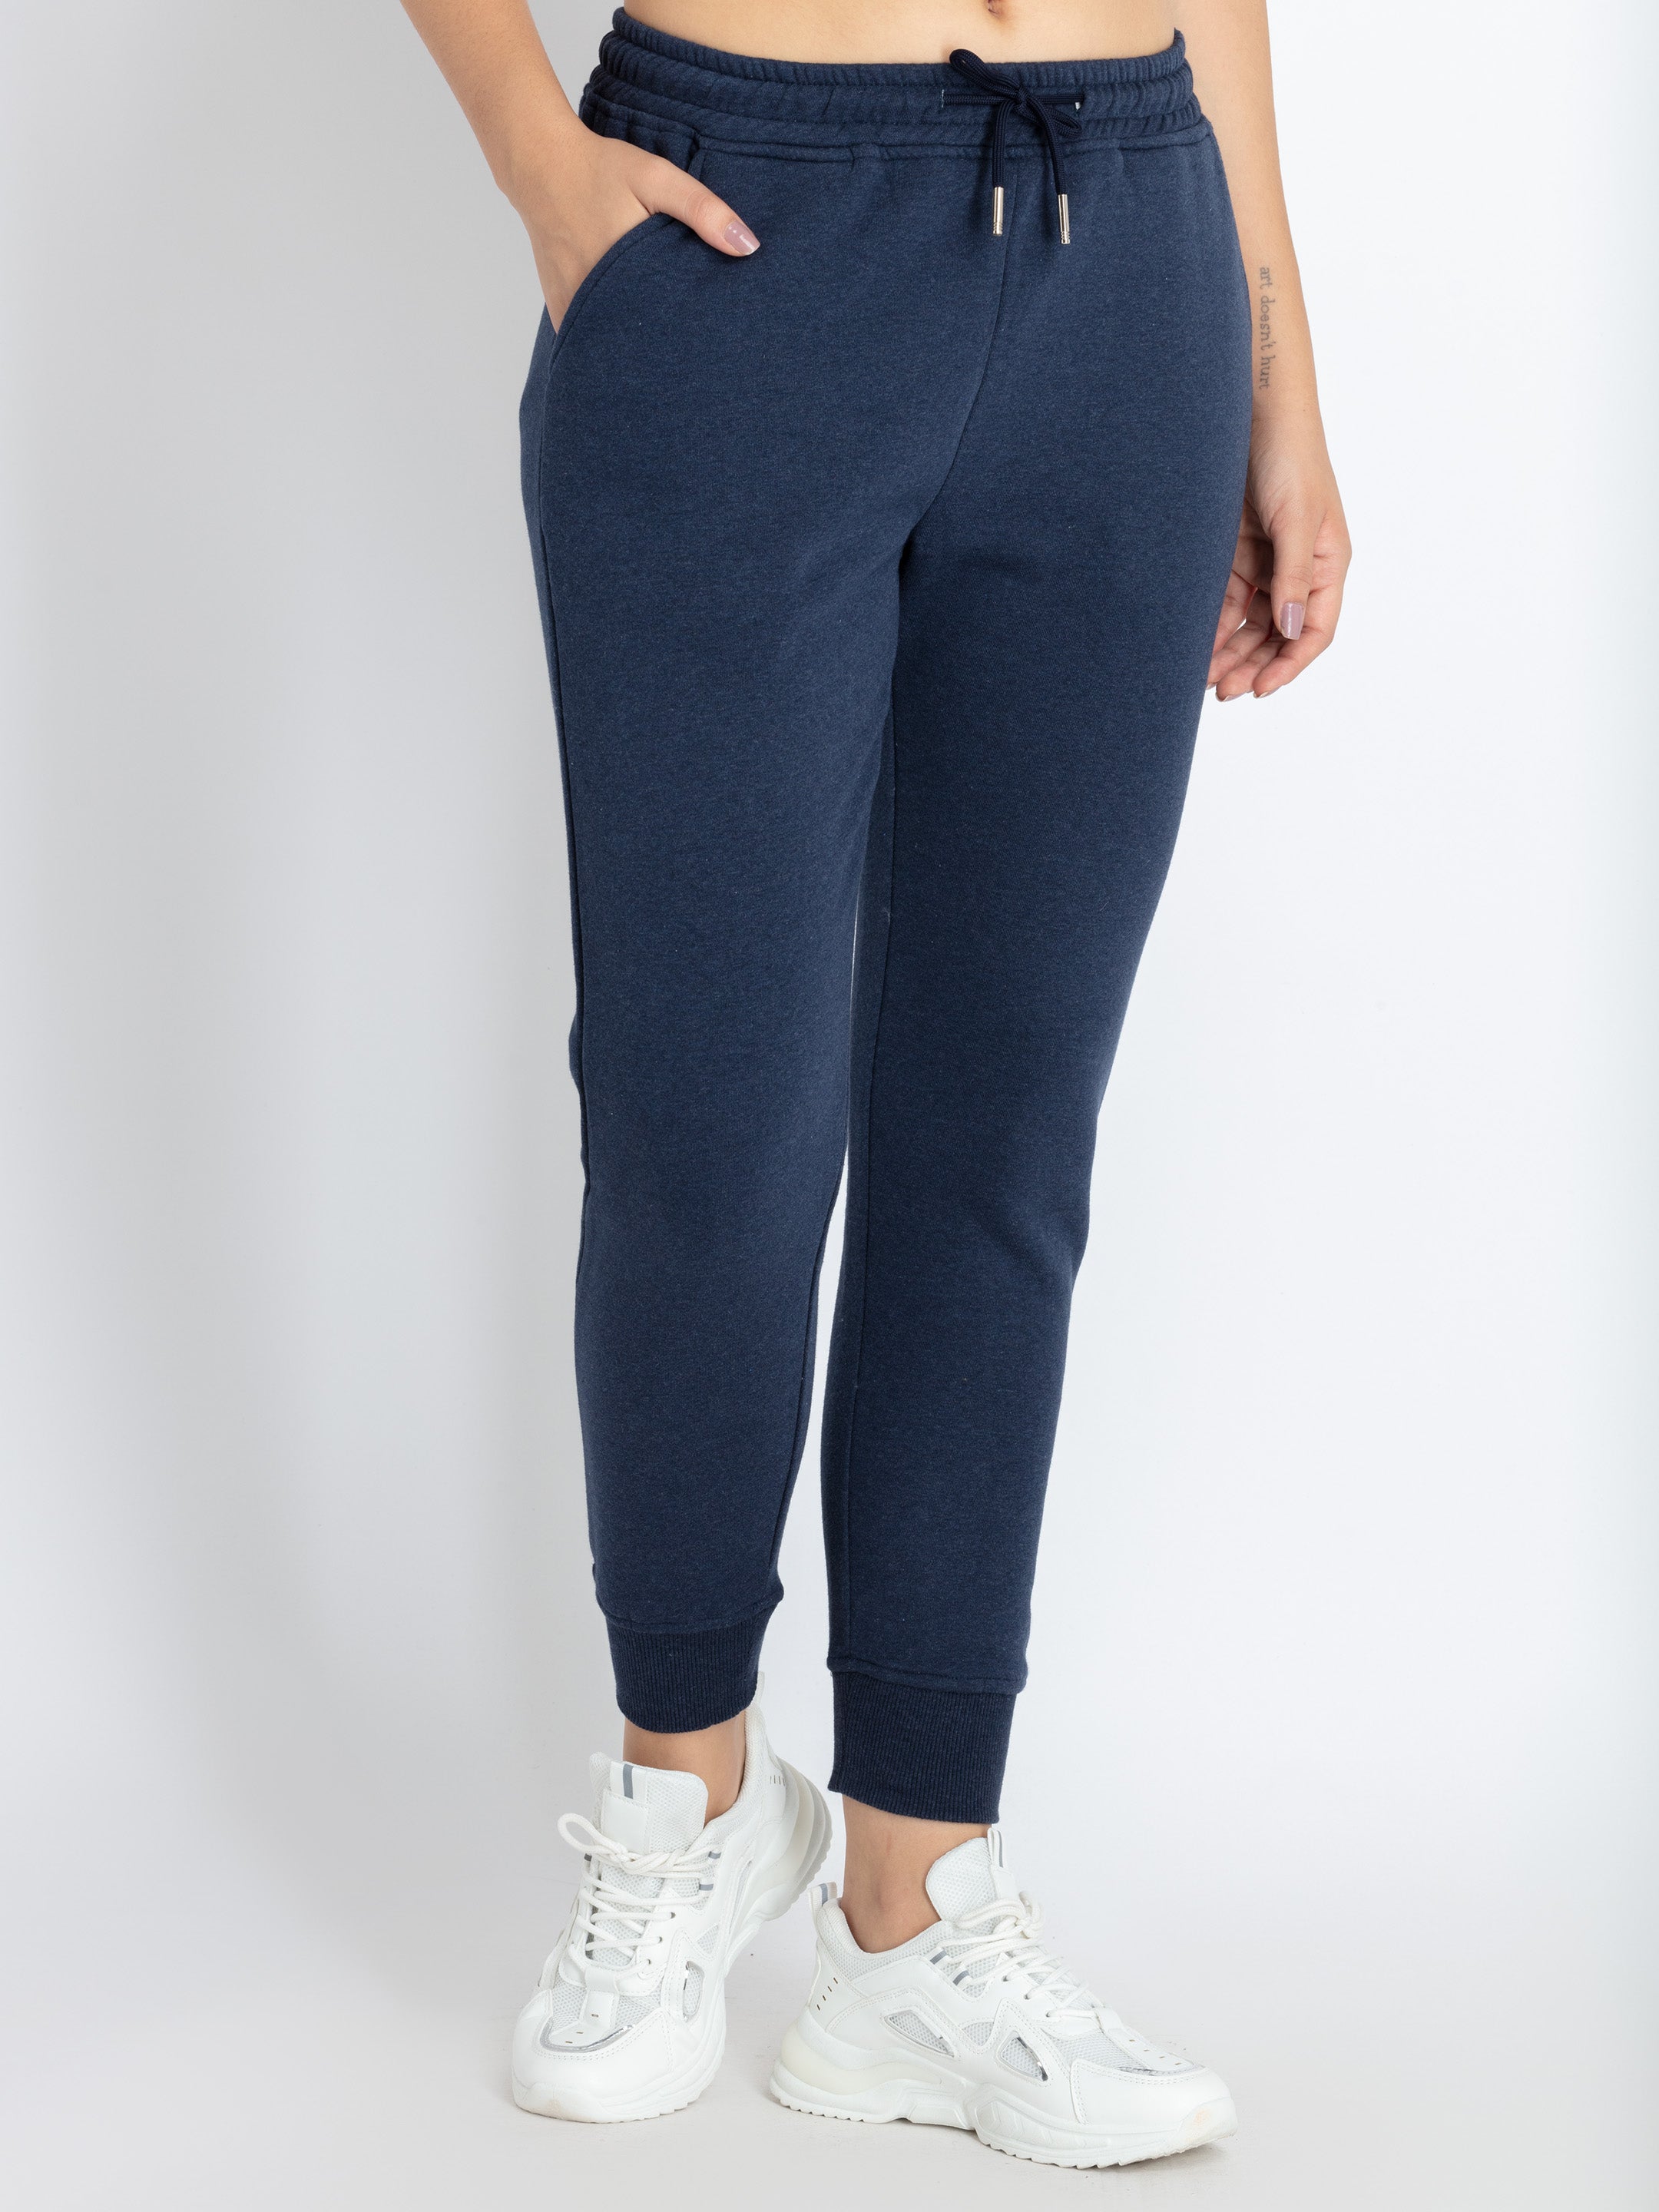 solid joggers for women